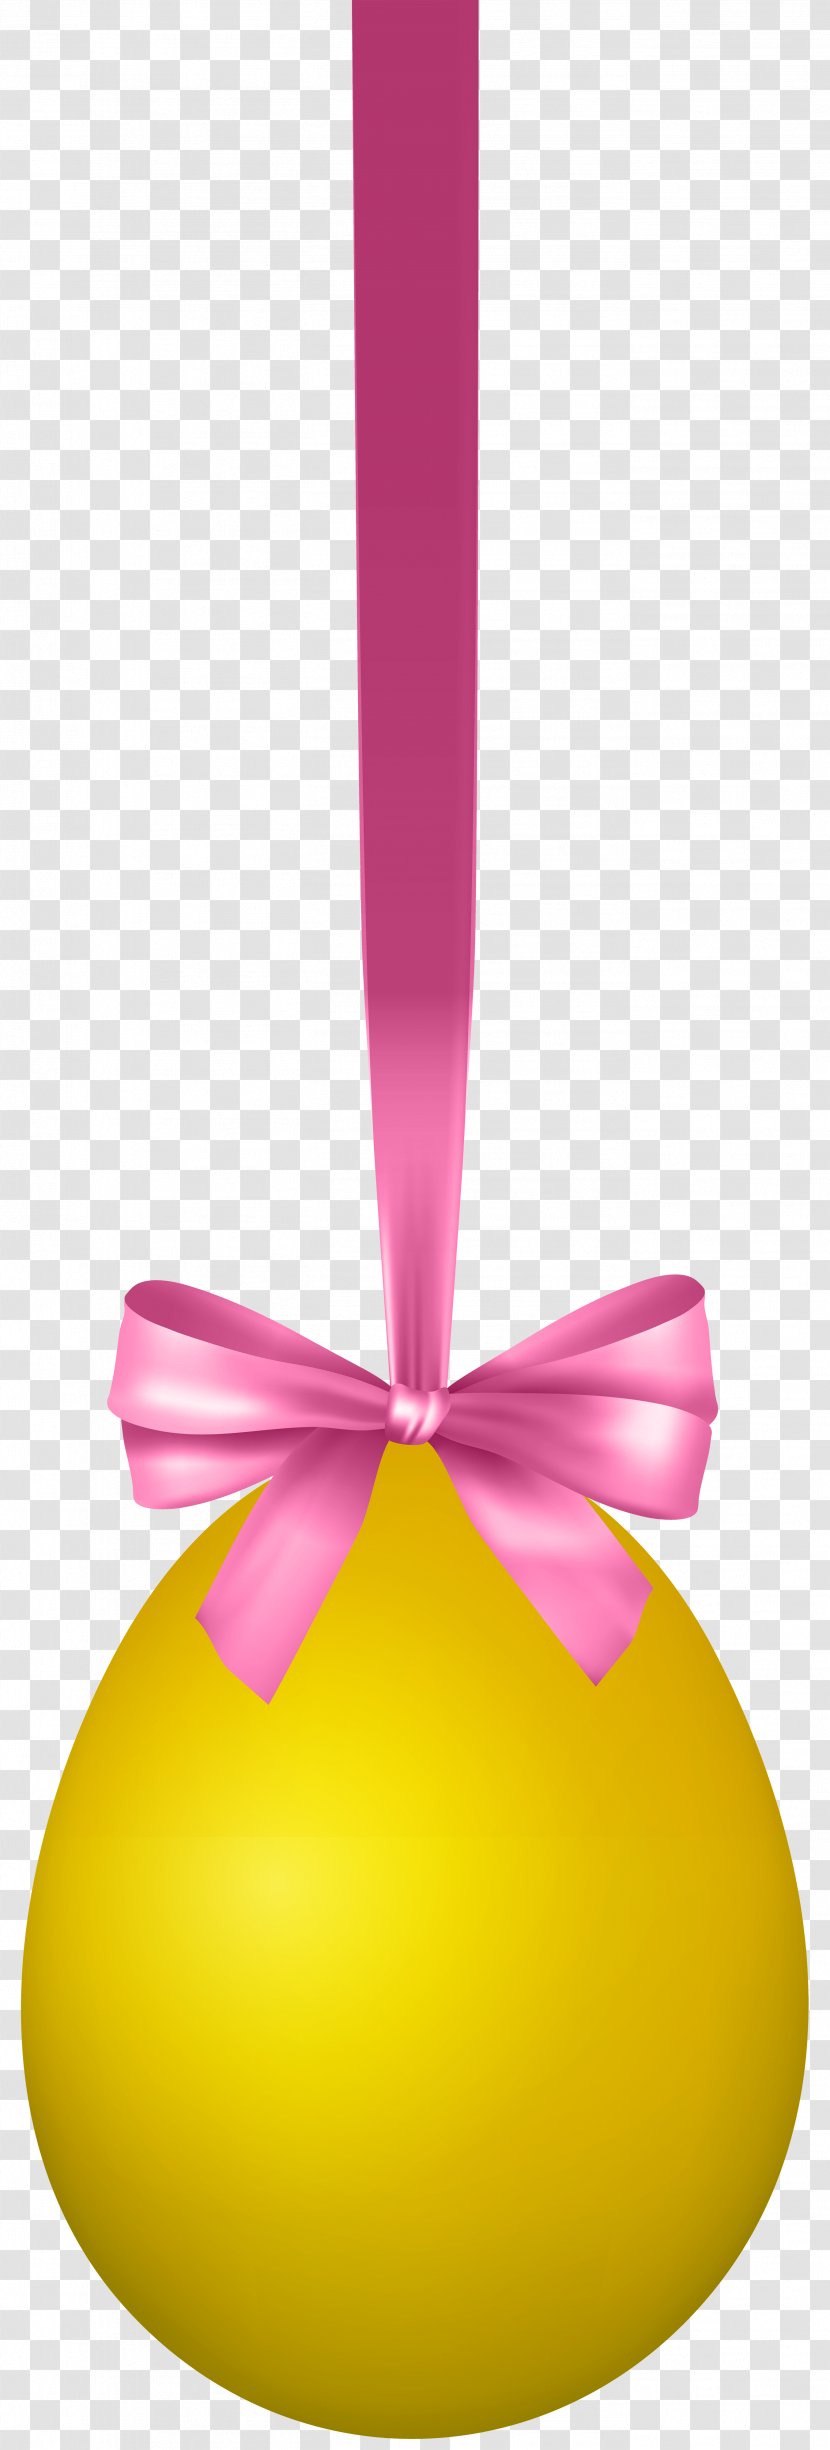 Yellow Easter Egg Design - Product - Hanging With Bow Transparent Clip Art Image Transparent PNG